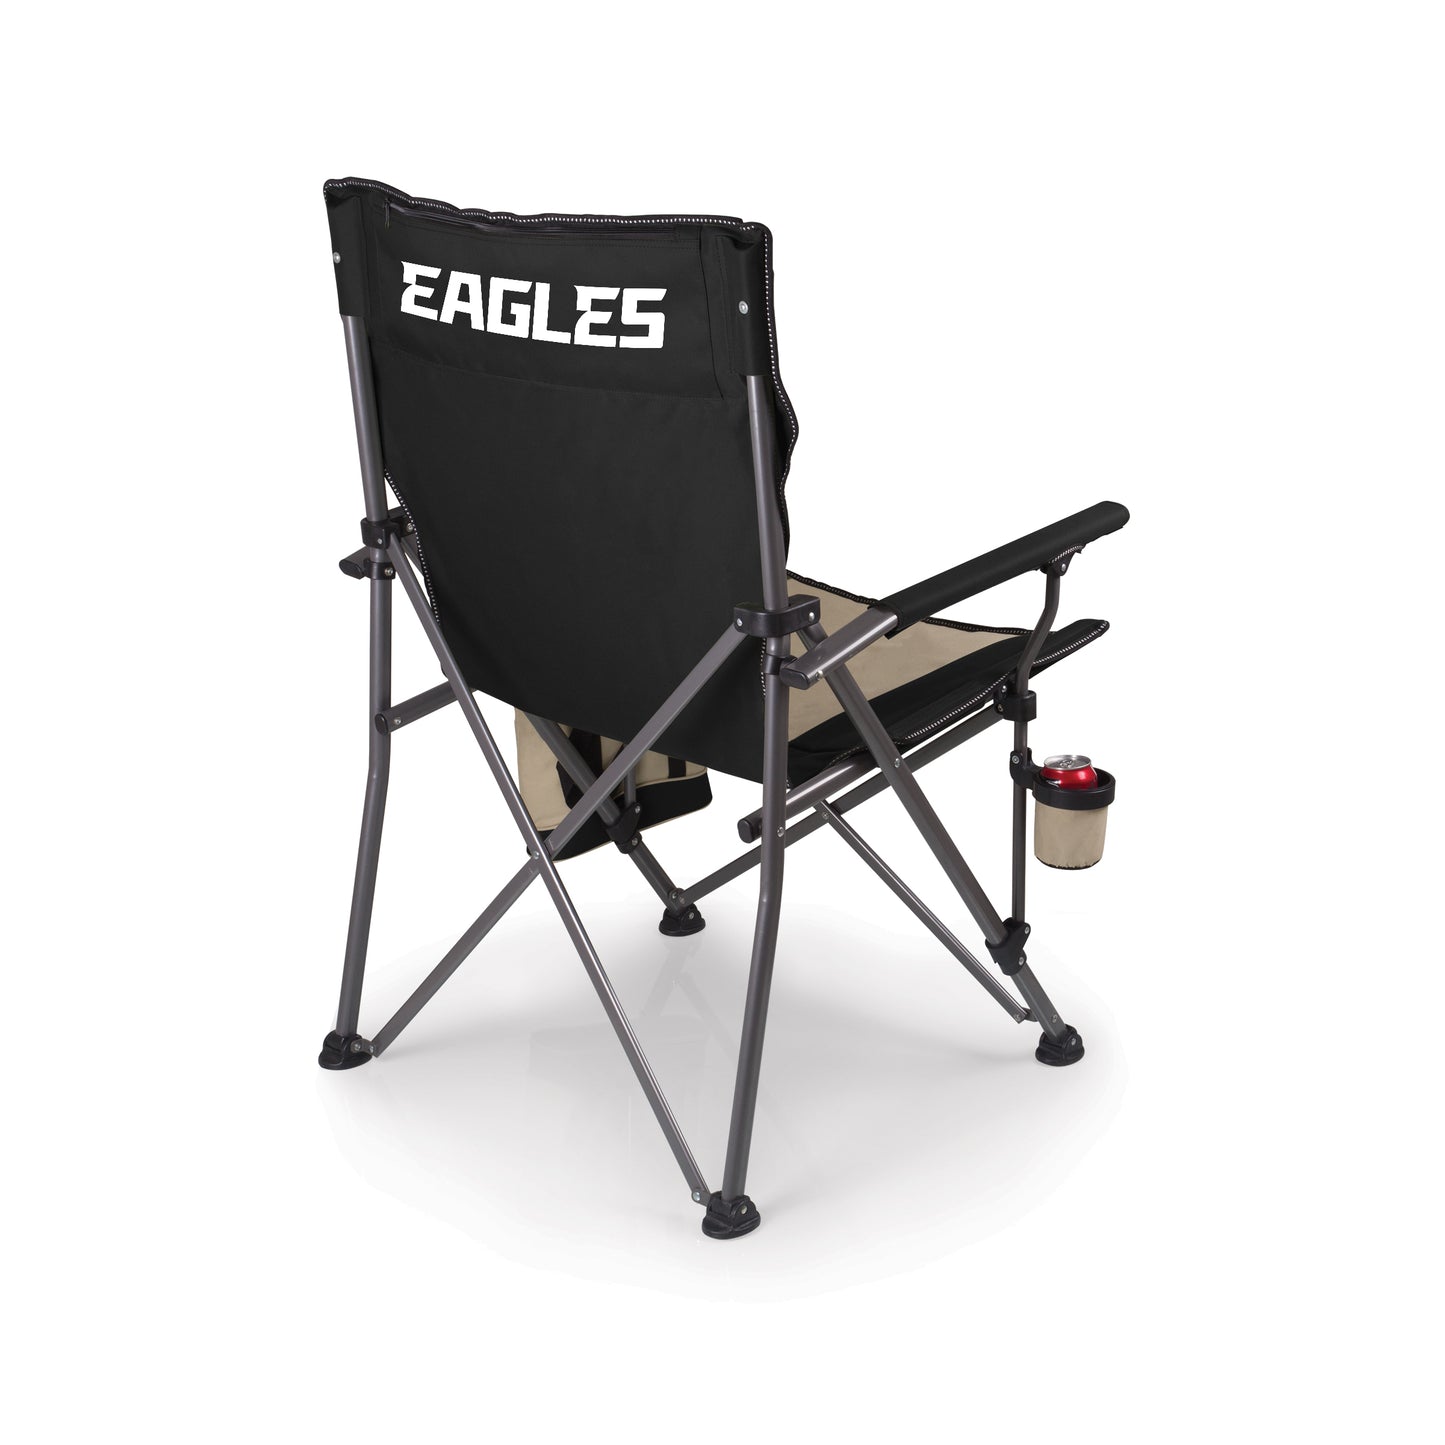 Philadelphia Eagles - Big Bear XL Camp Chair with Cooler